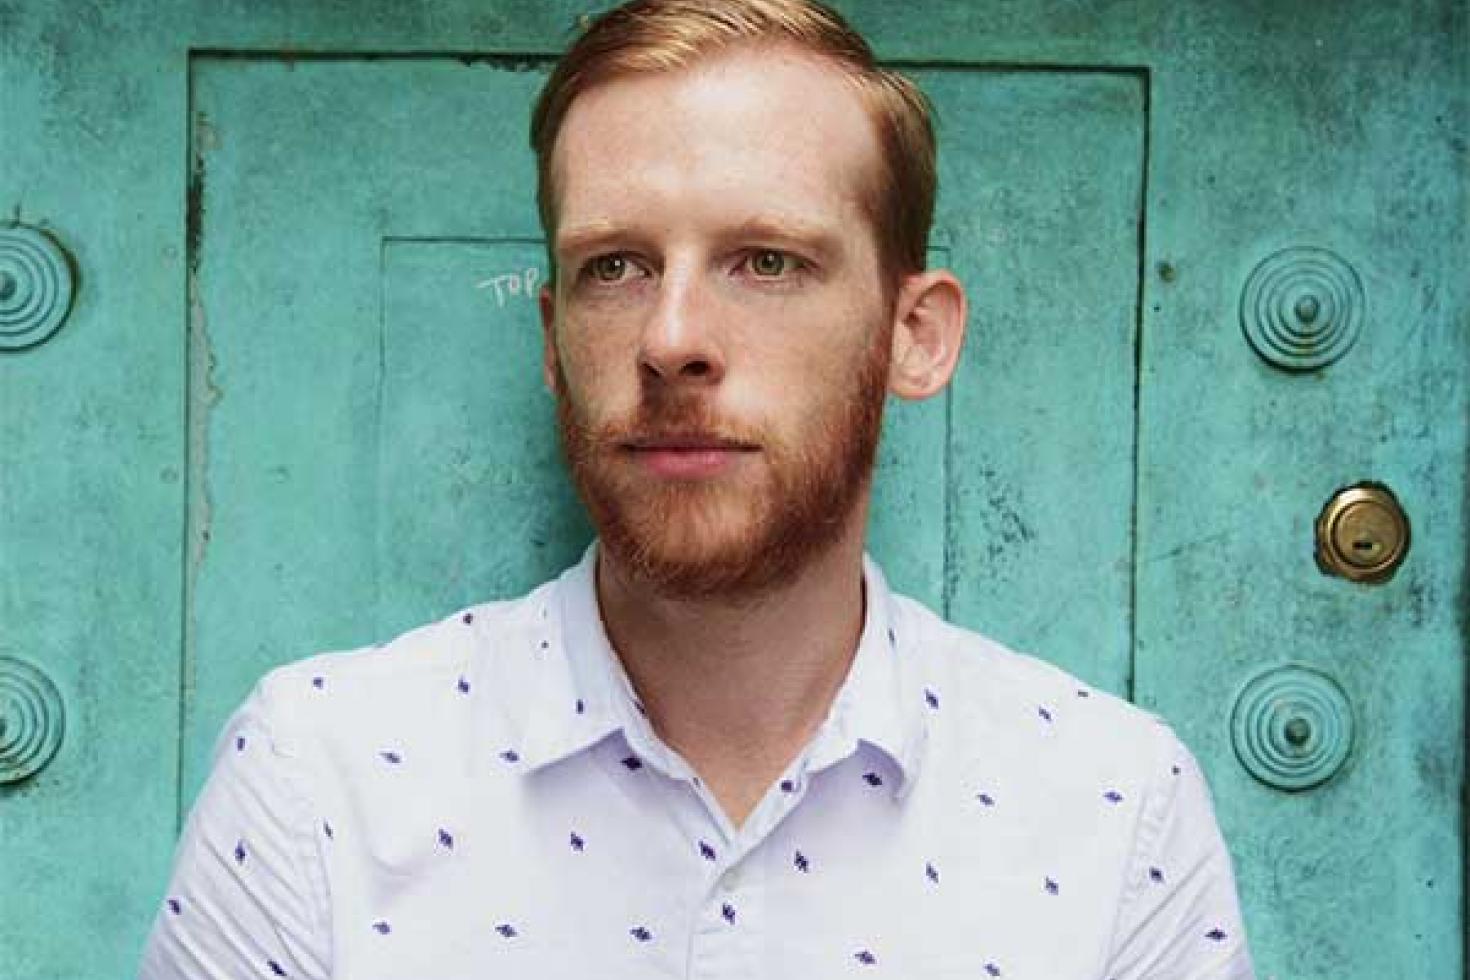 News - Kevin Devine Announces Devinyl Splits No. 6 with Brand New's Jesse  Lacey